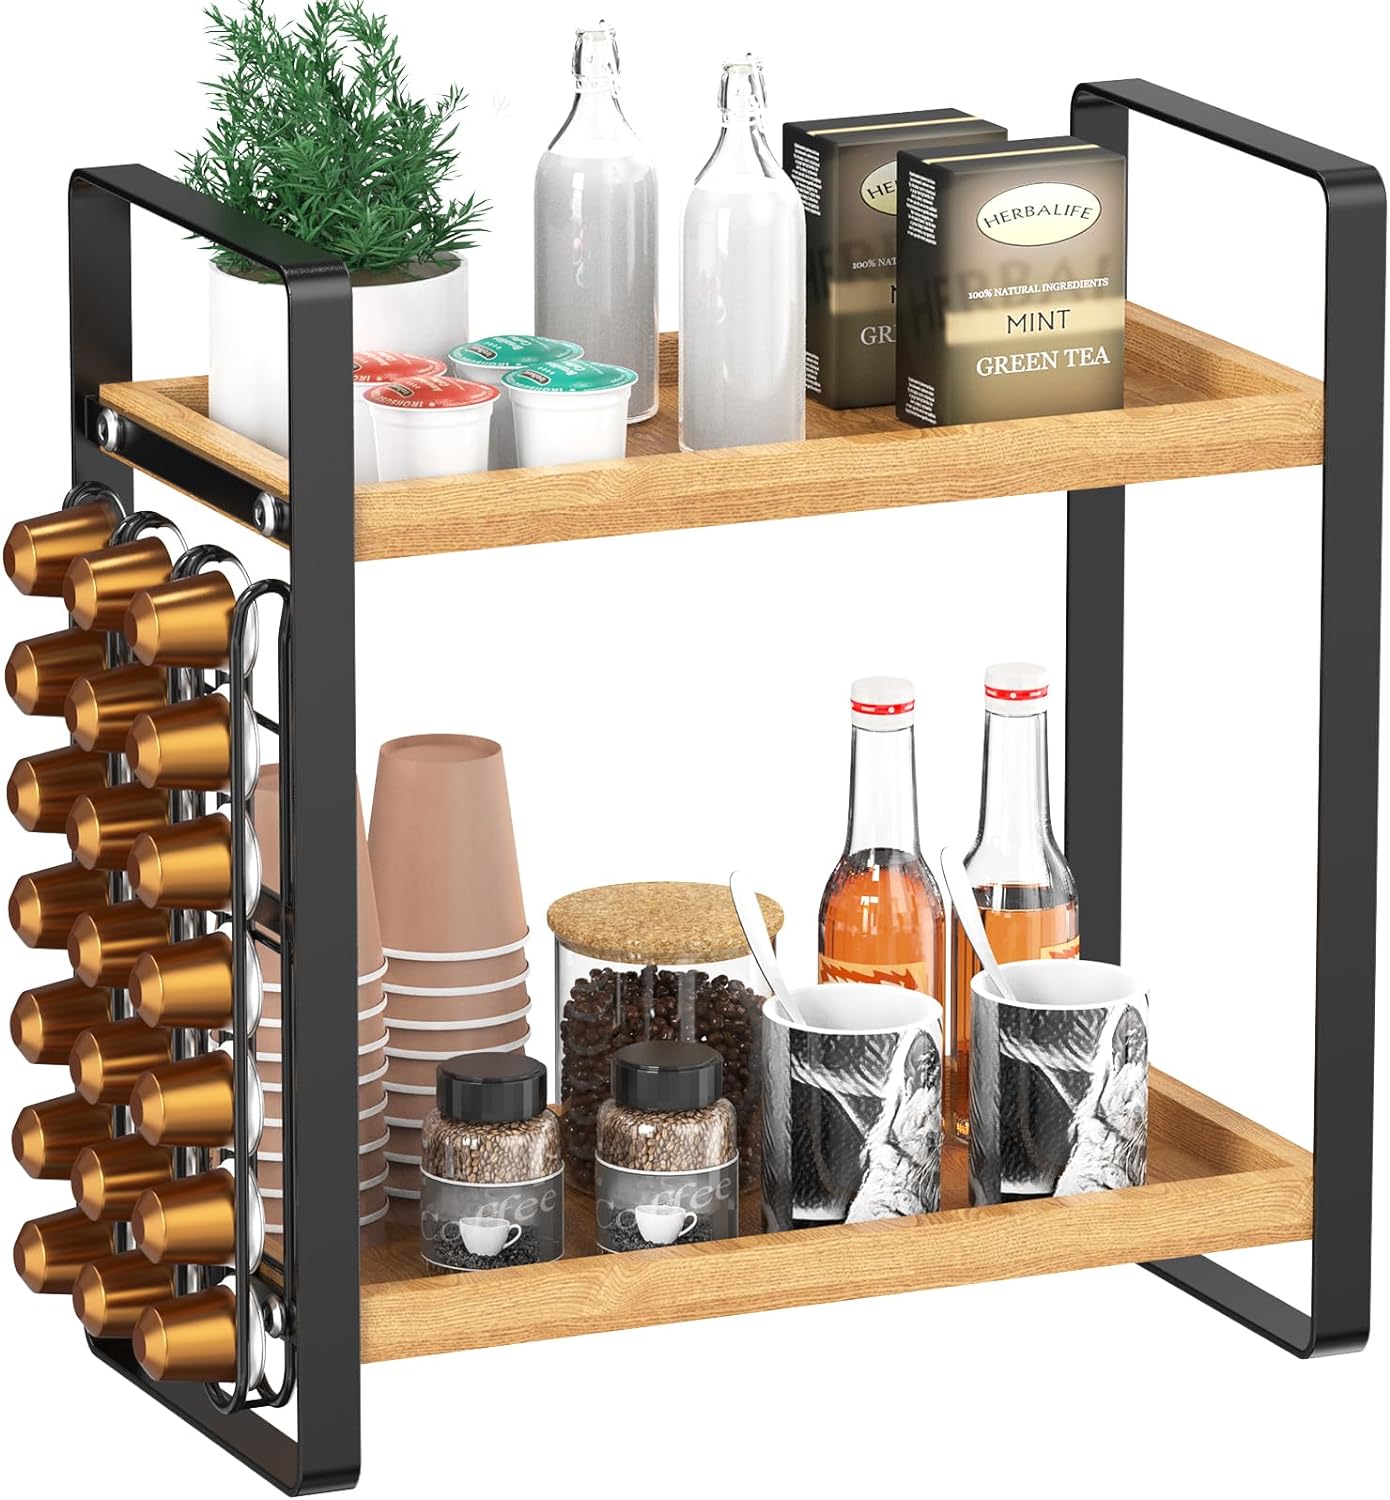 LEMIKKLE Coffee Station Organizer, Large Capacity Coffee Pod Holder Coffee Bar Accessories and Cup Storage Organizer, Set of 2 tie Wood Counter Shelves for Kitchen, Office, Countertop(Brown)